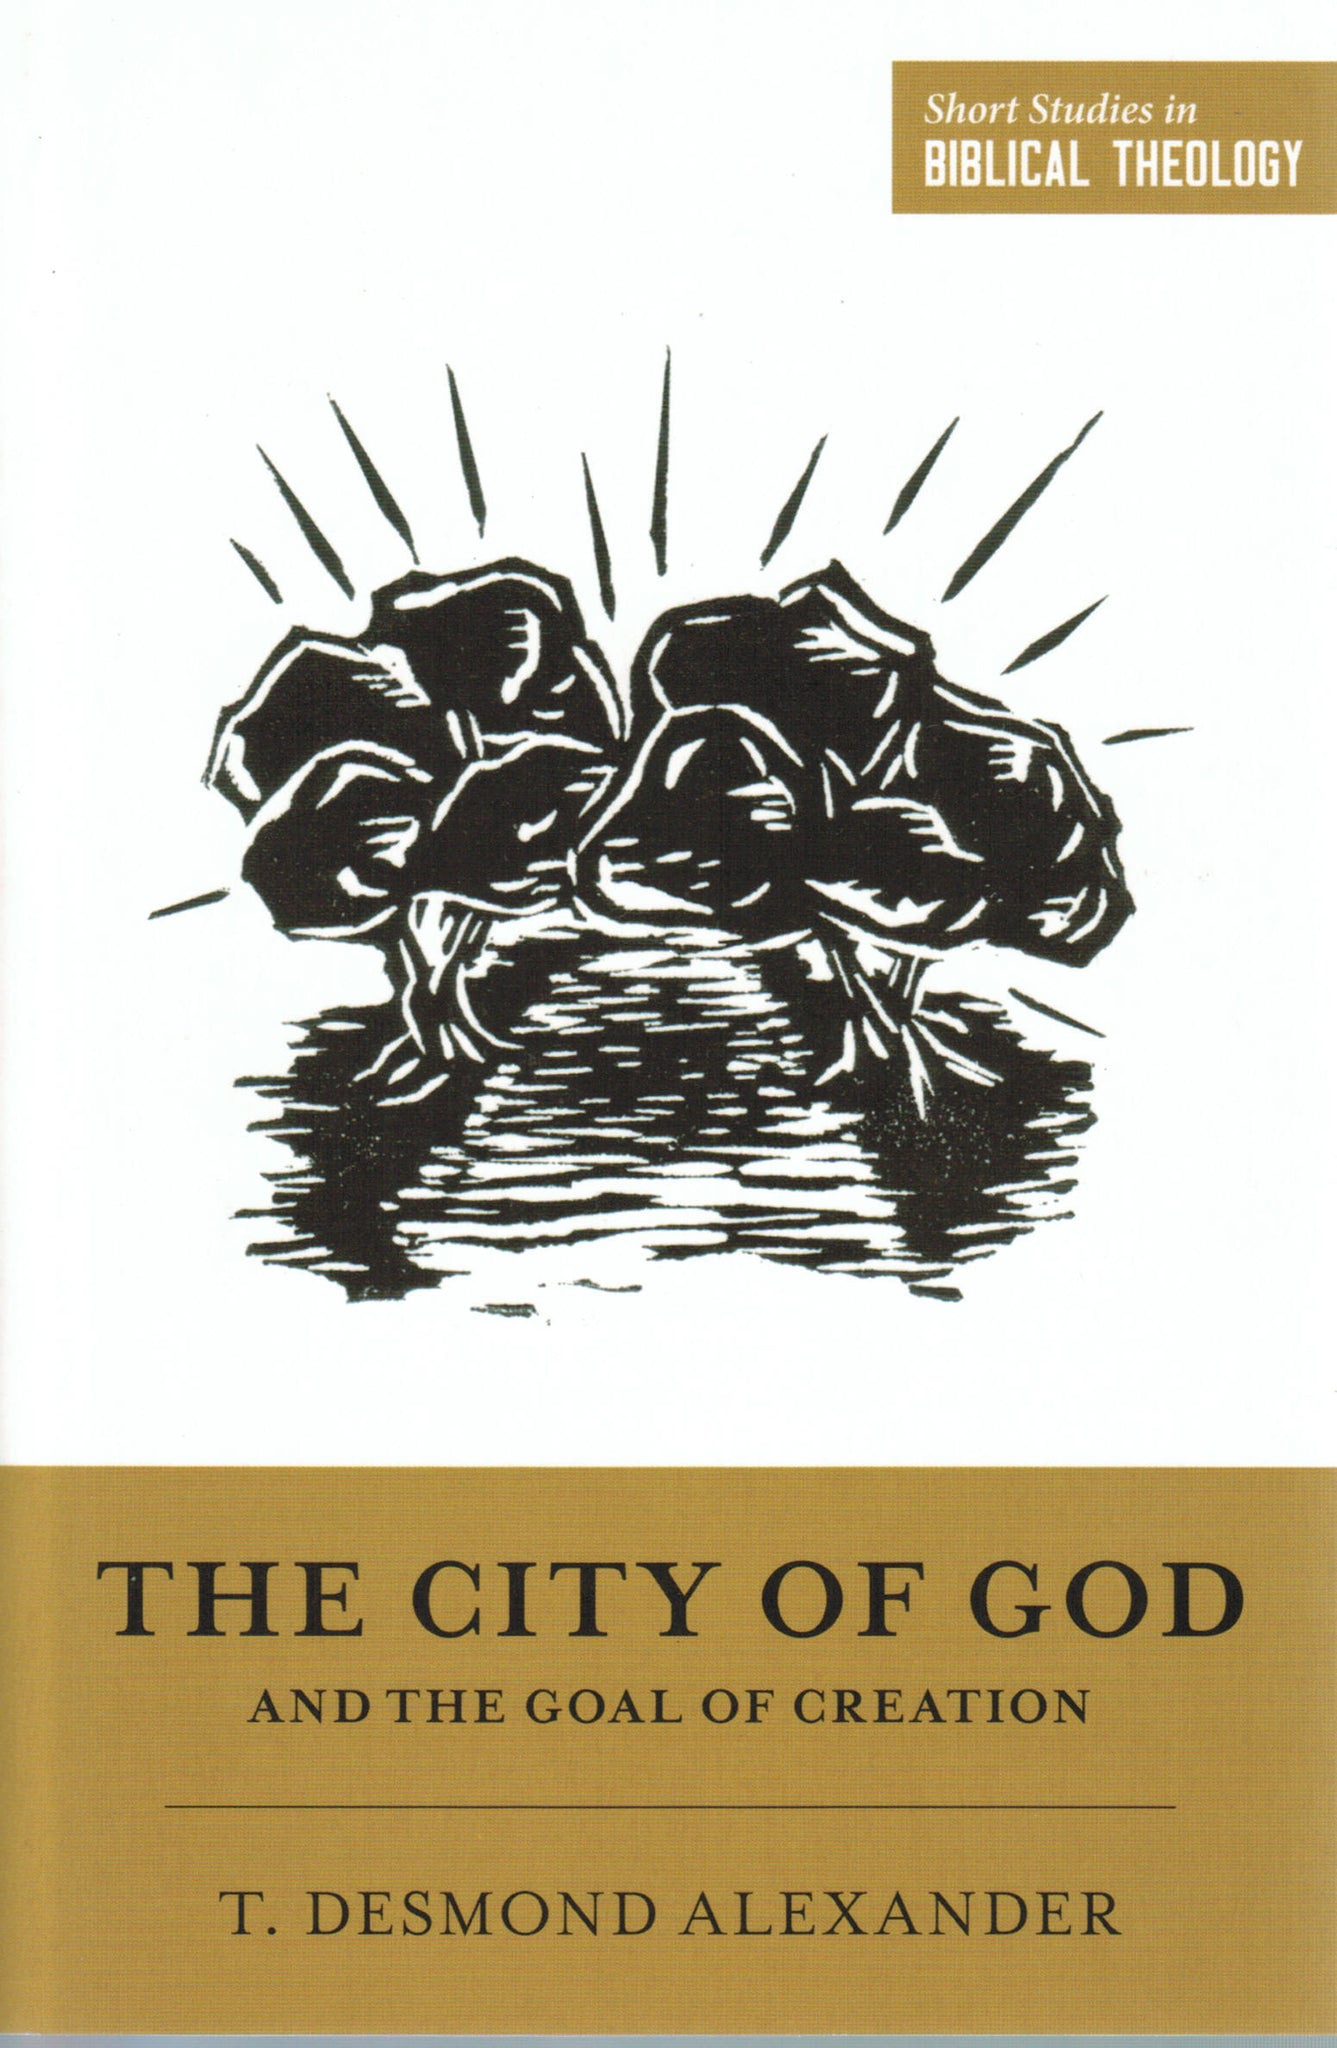 Short Studies in Biblical Theology - The City of God and the Goal of Creation